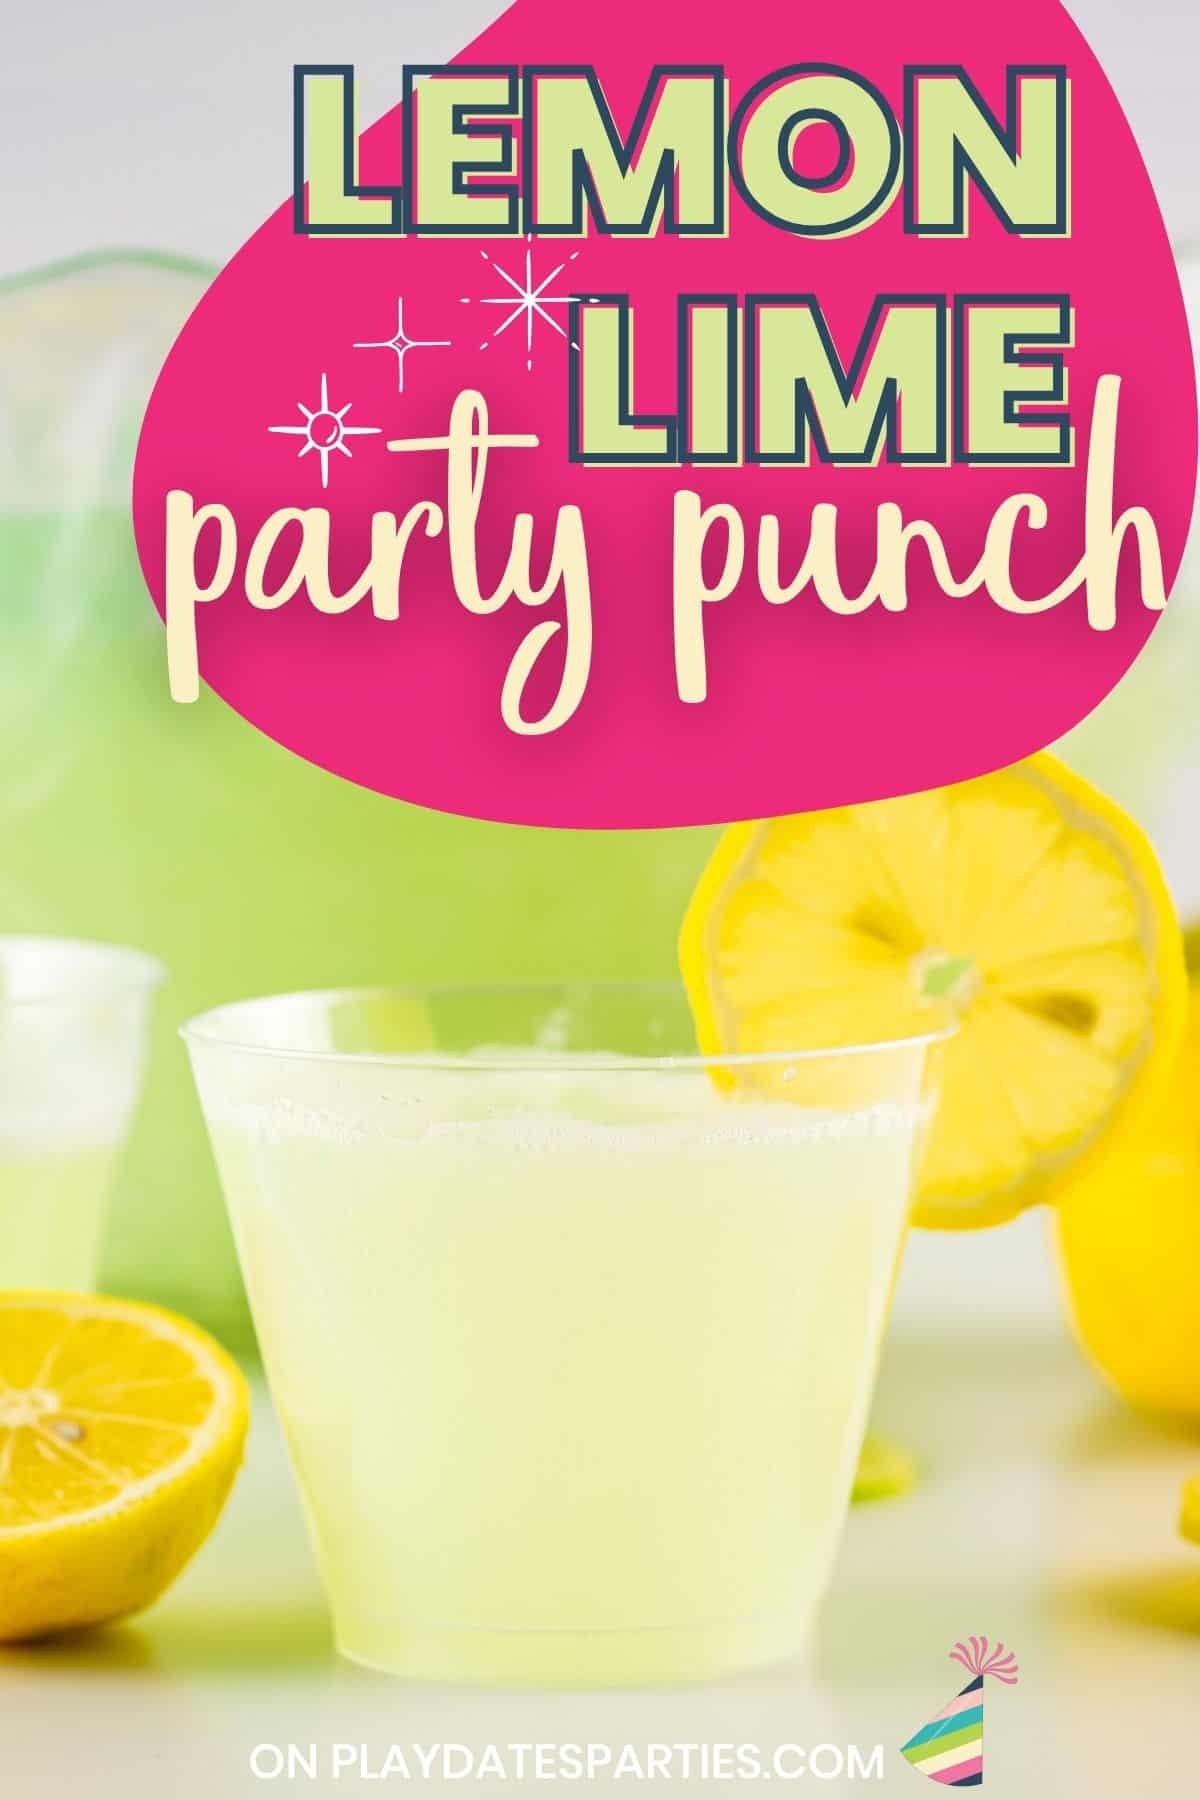 Lemon Lime Party Punch pin image.